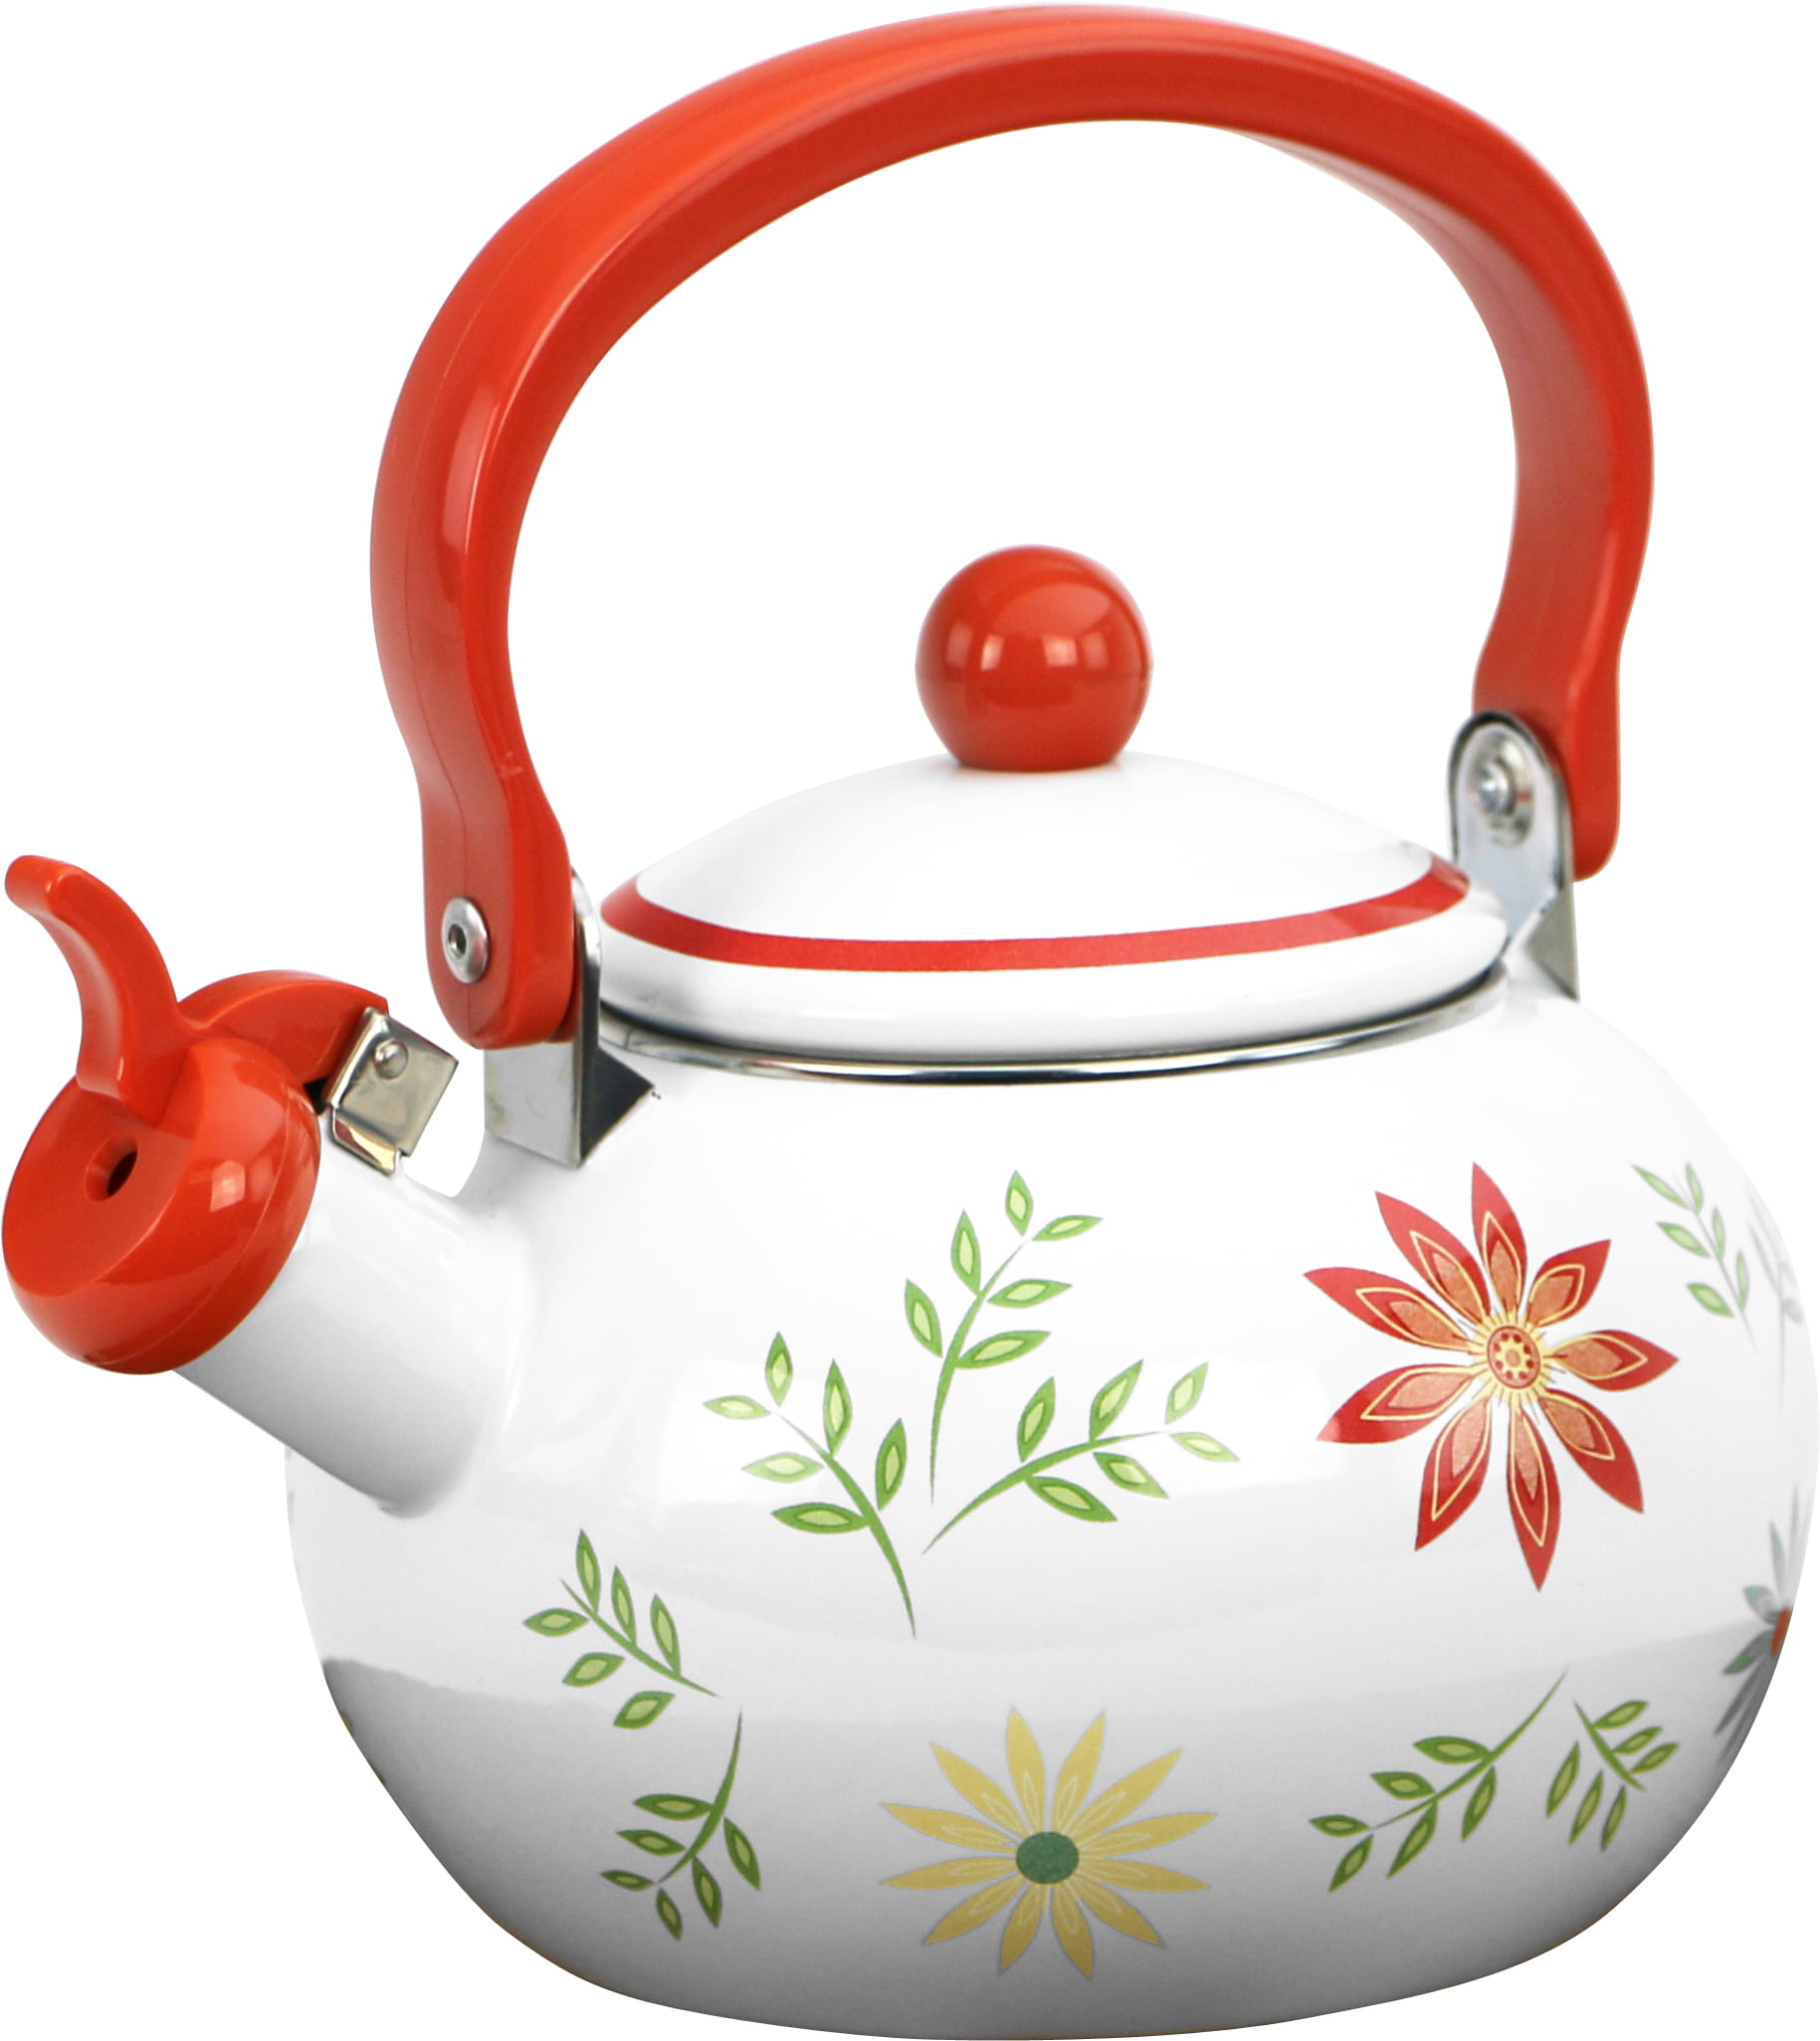 The Tea Kettle That Made Me Excited About Mornings Again